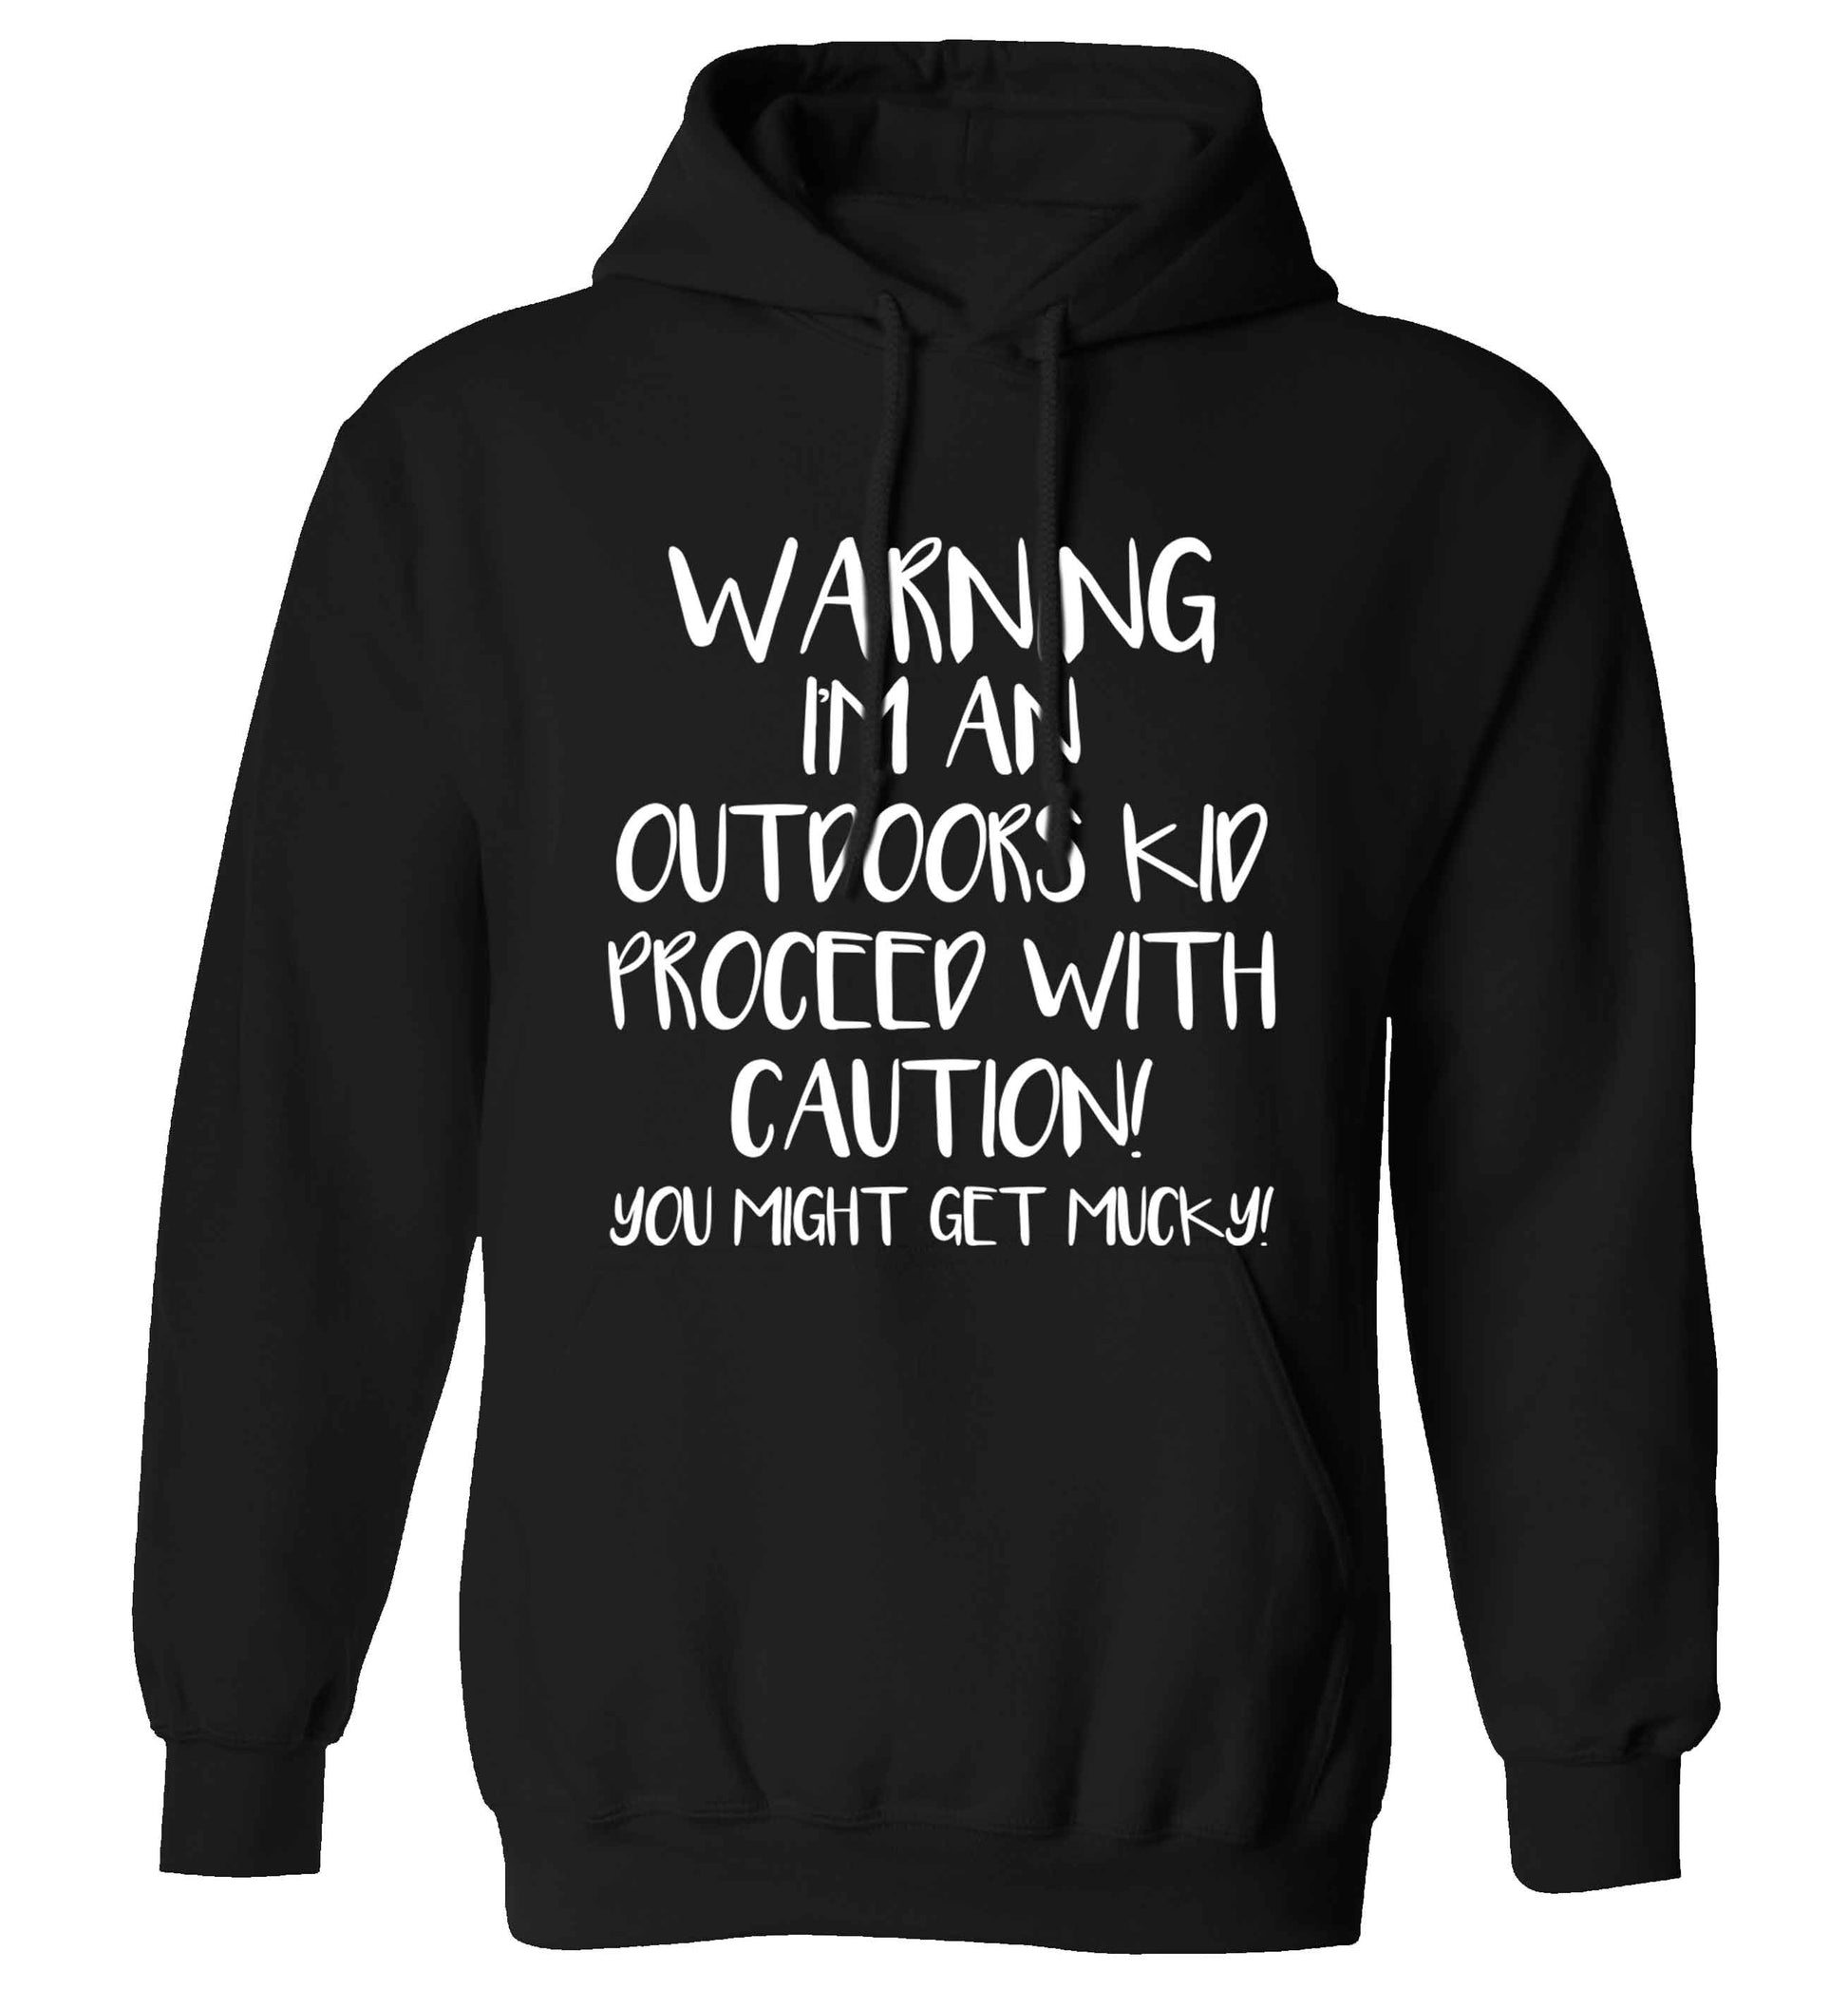 Warning I'm an outdoors kid! Proceed with caution you might get mucky adults unisex black hoodie 2XL